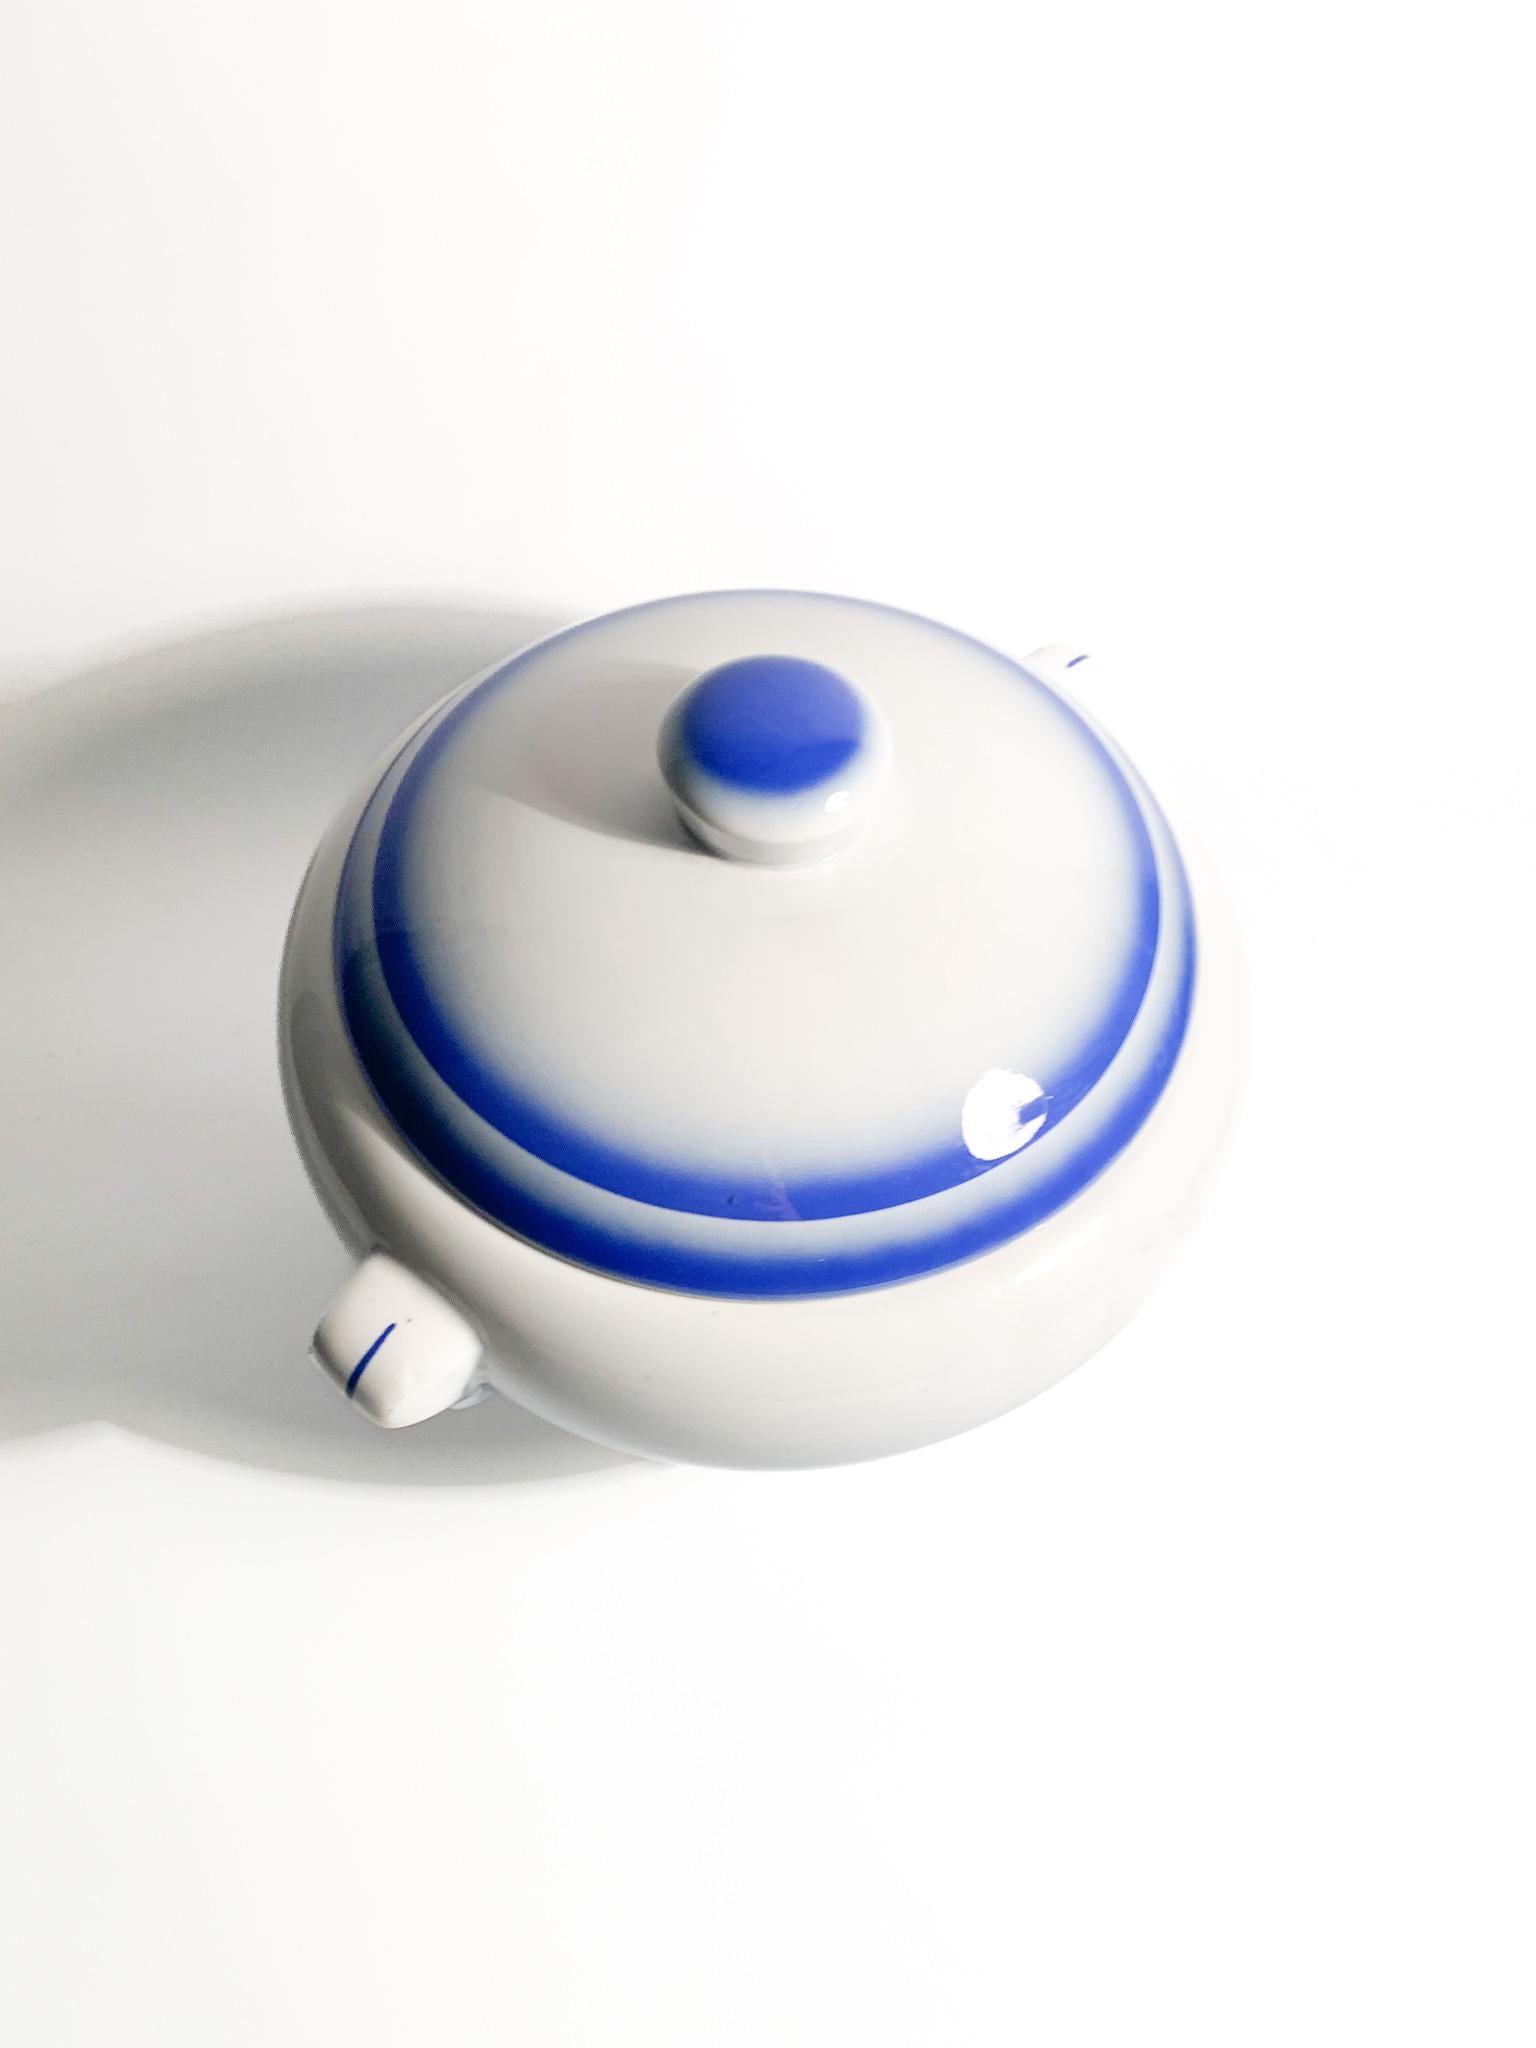 Italian White and Blue Ceramic Centerpiece Tureen by Galvani Pordenone from the 1950s For Sale